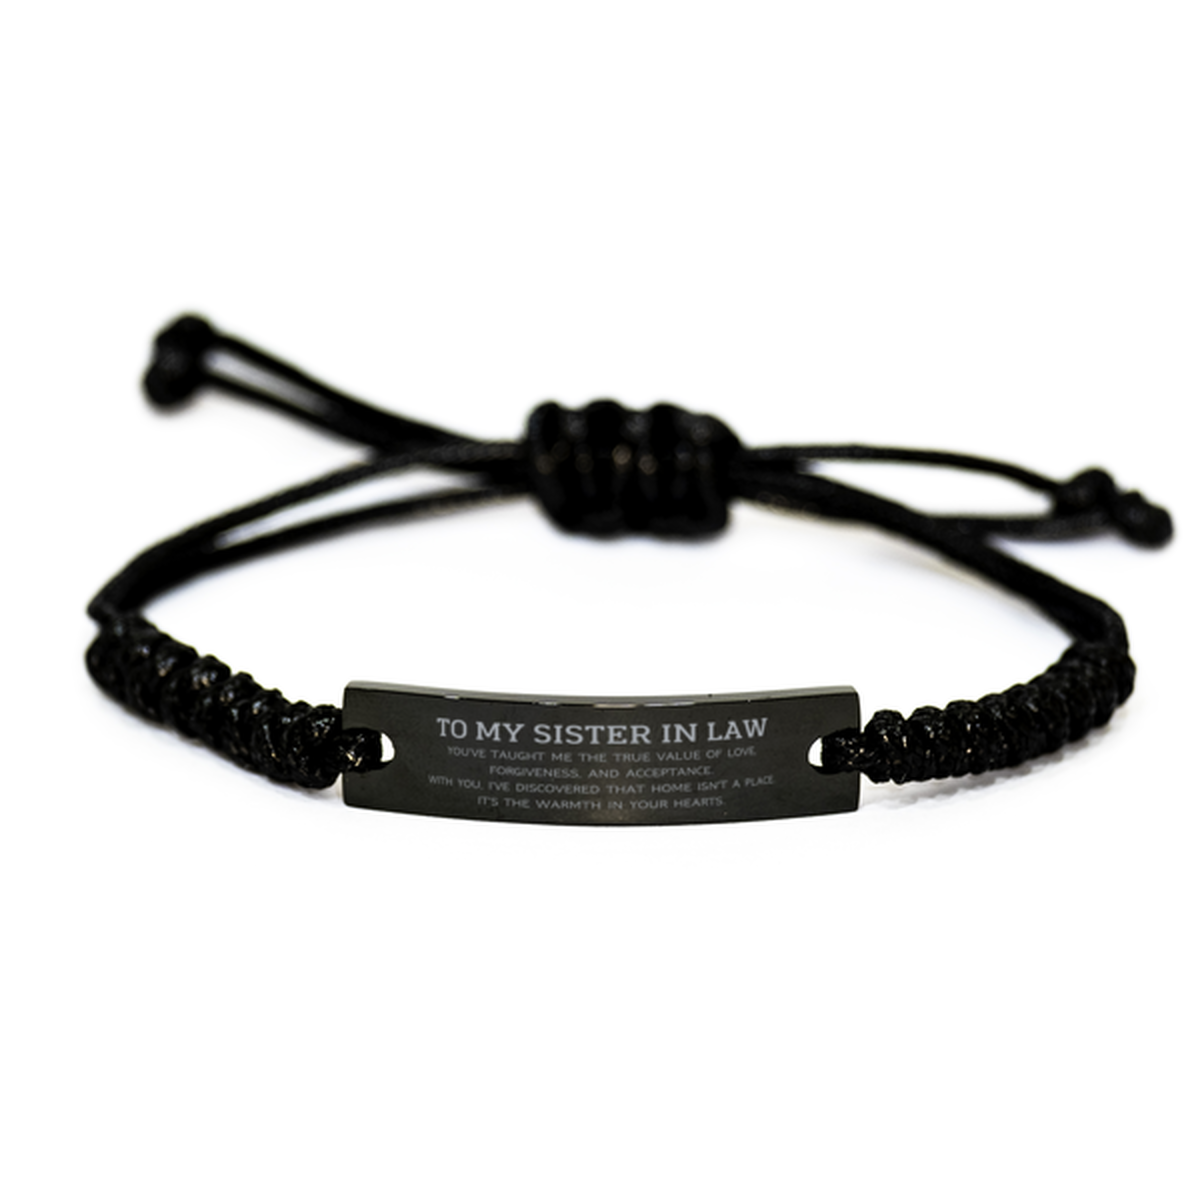 To My Sister In Law Gifts, You've taught me the true value of love, Thank You Gifts For Sister In Law, Birthday Black Rope Bracelet For Sister In Law